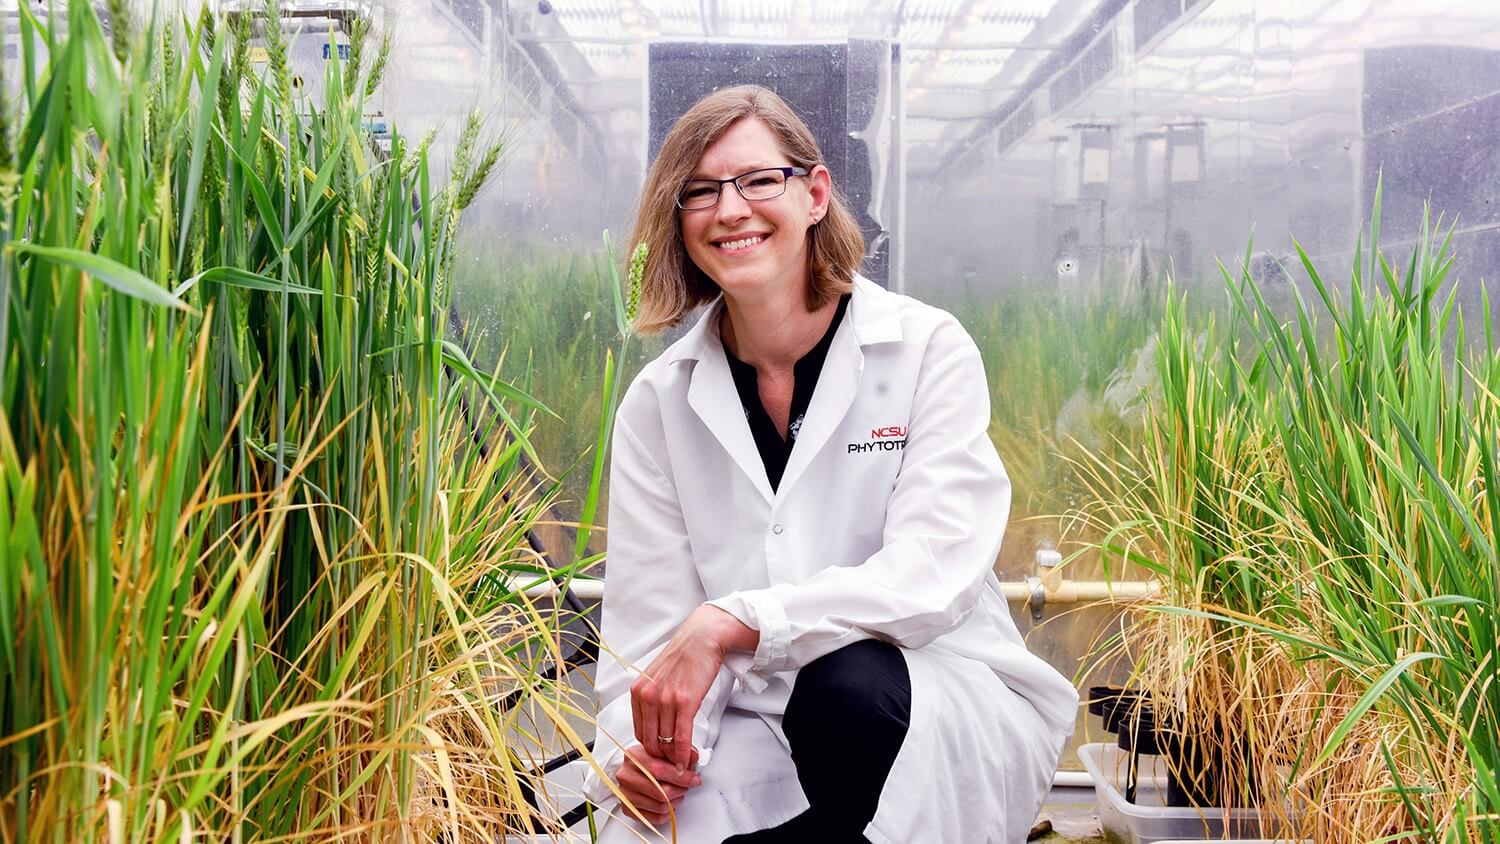 NC State University: Improving the world through plant science innovation